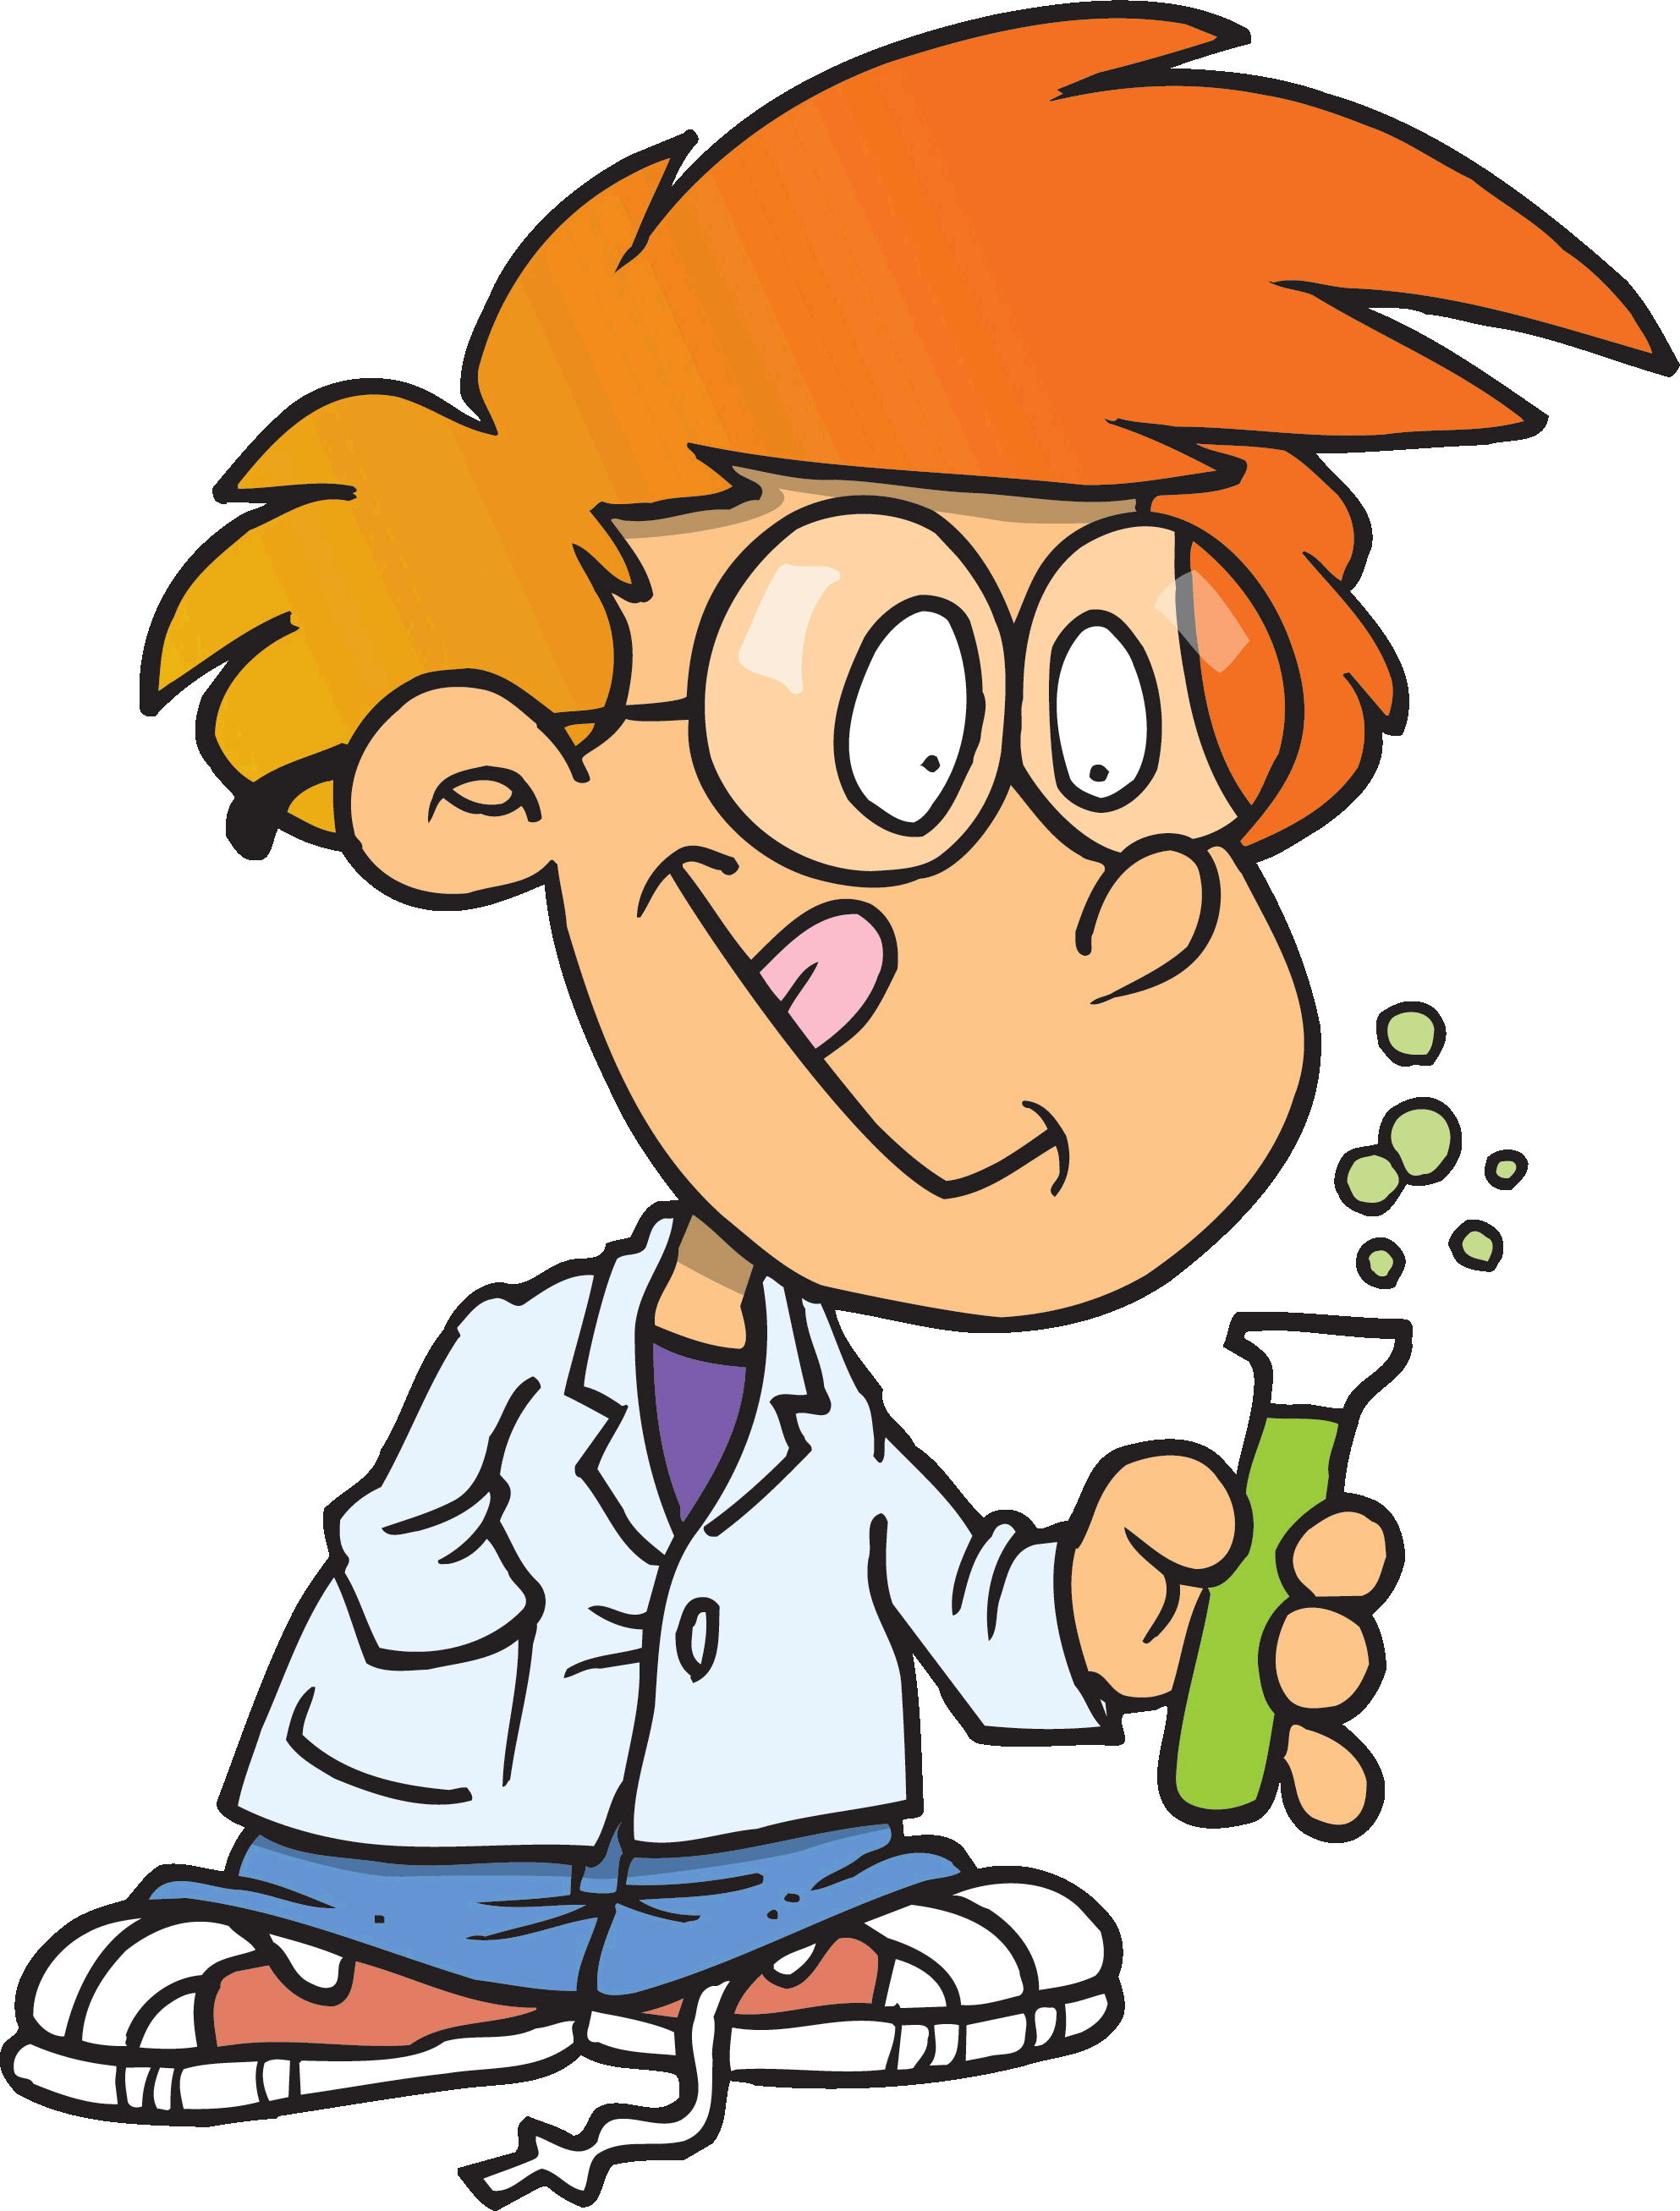 Science experiment cool experiments. Scientist clipart dog